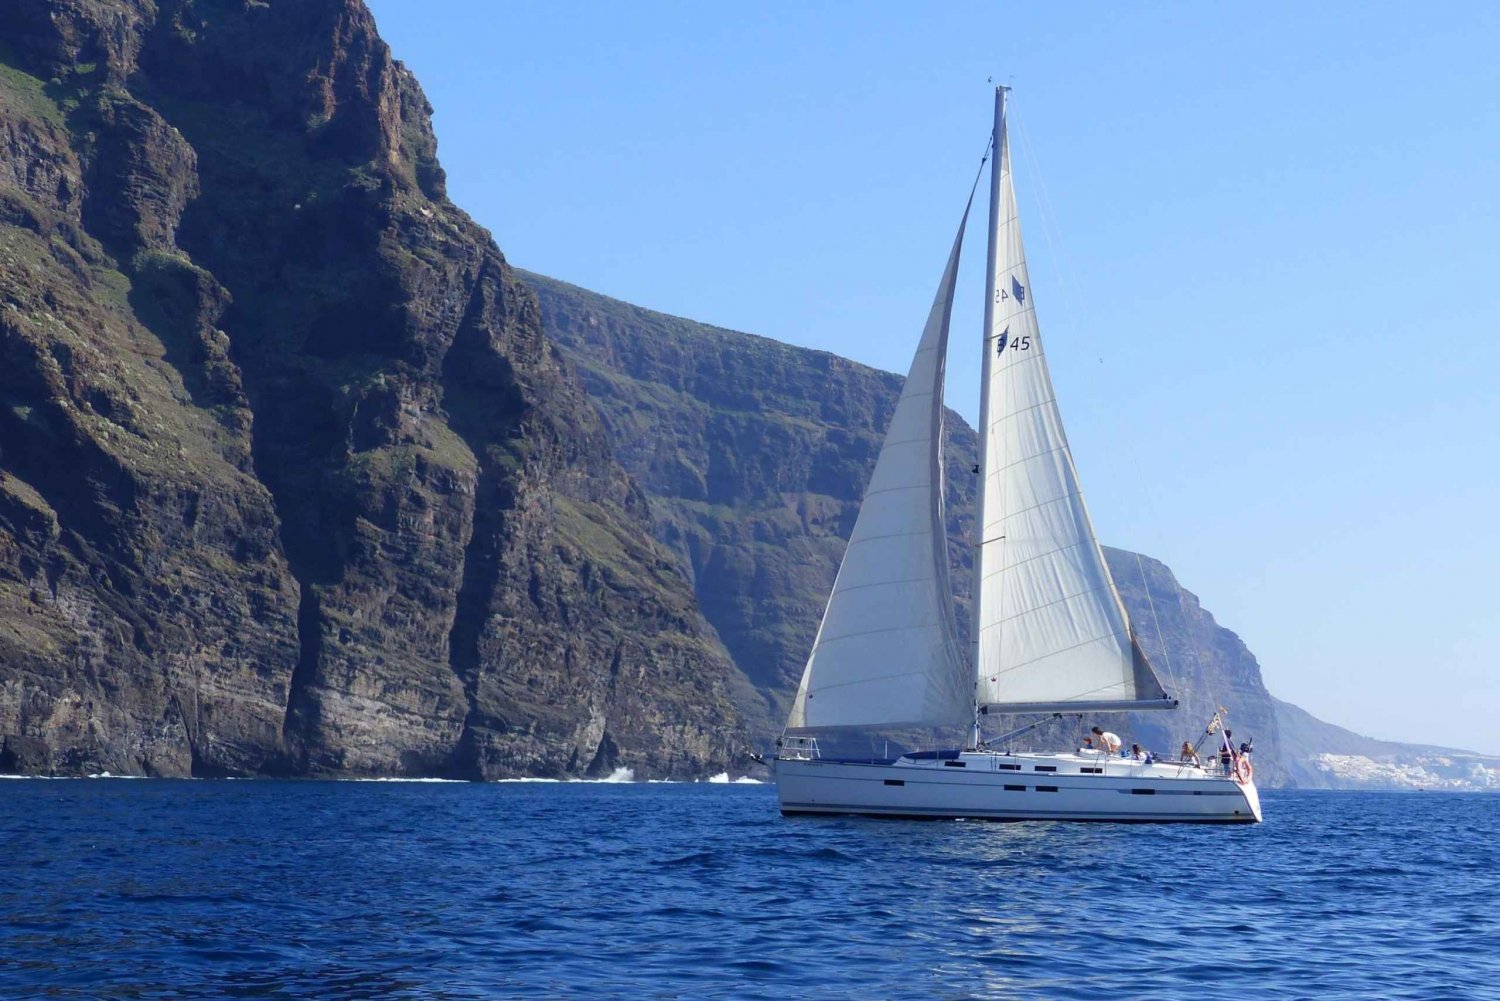 Los Gigantes Whale Watching Cruise by Sail Boat